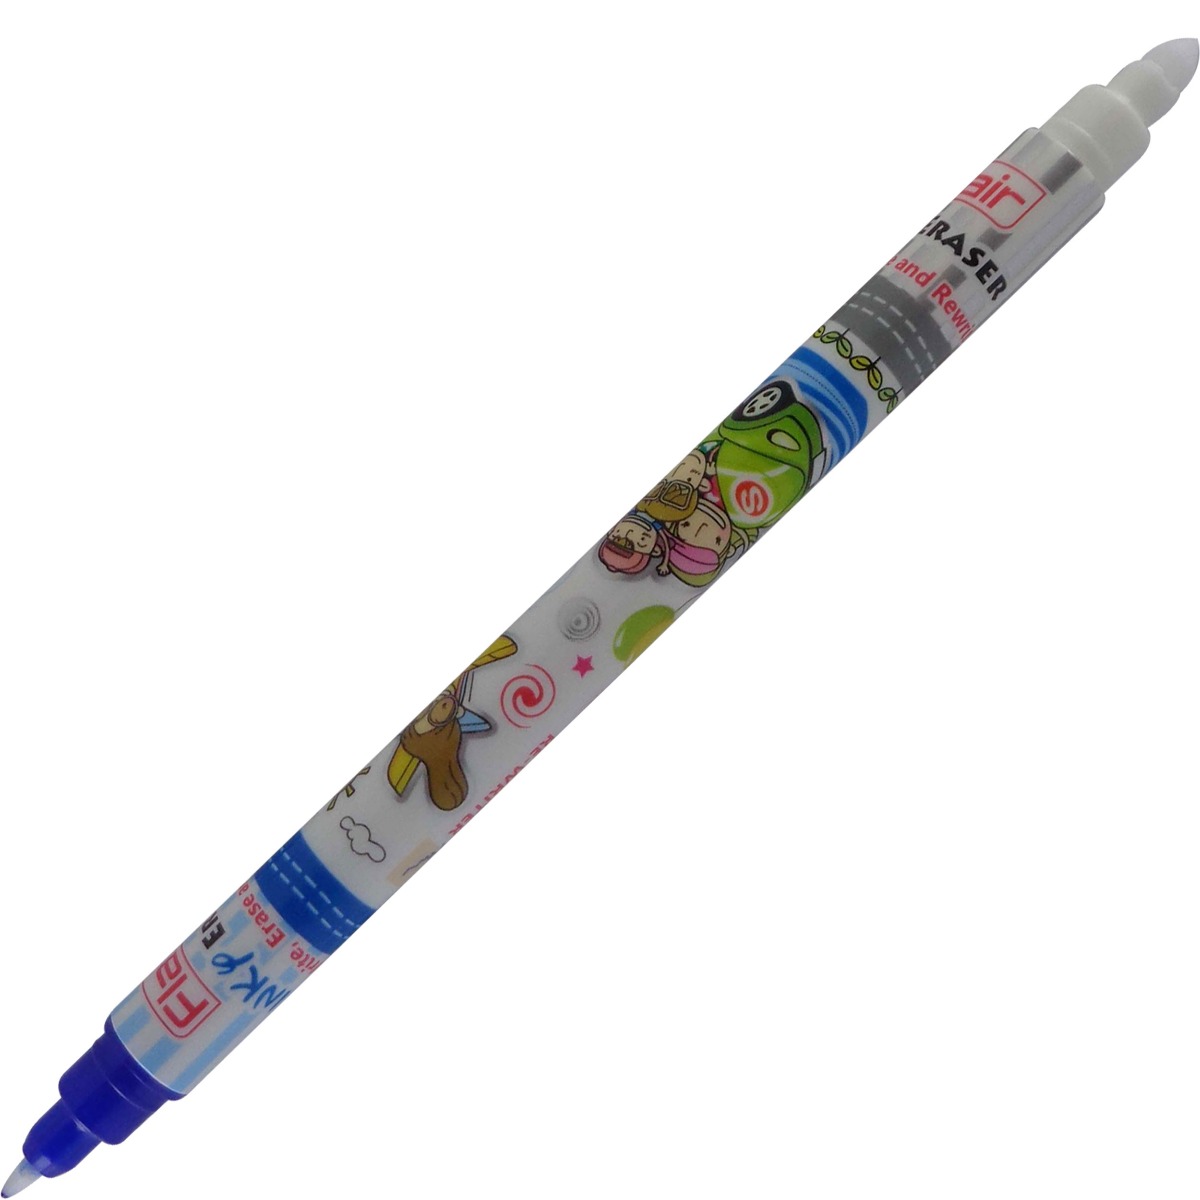 Flair Inky Eraser blue color cap type gel pen with Eraser  at the bottom